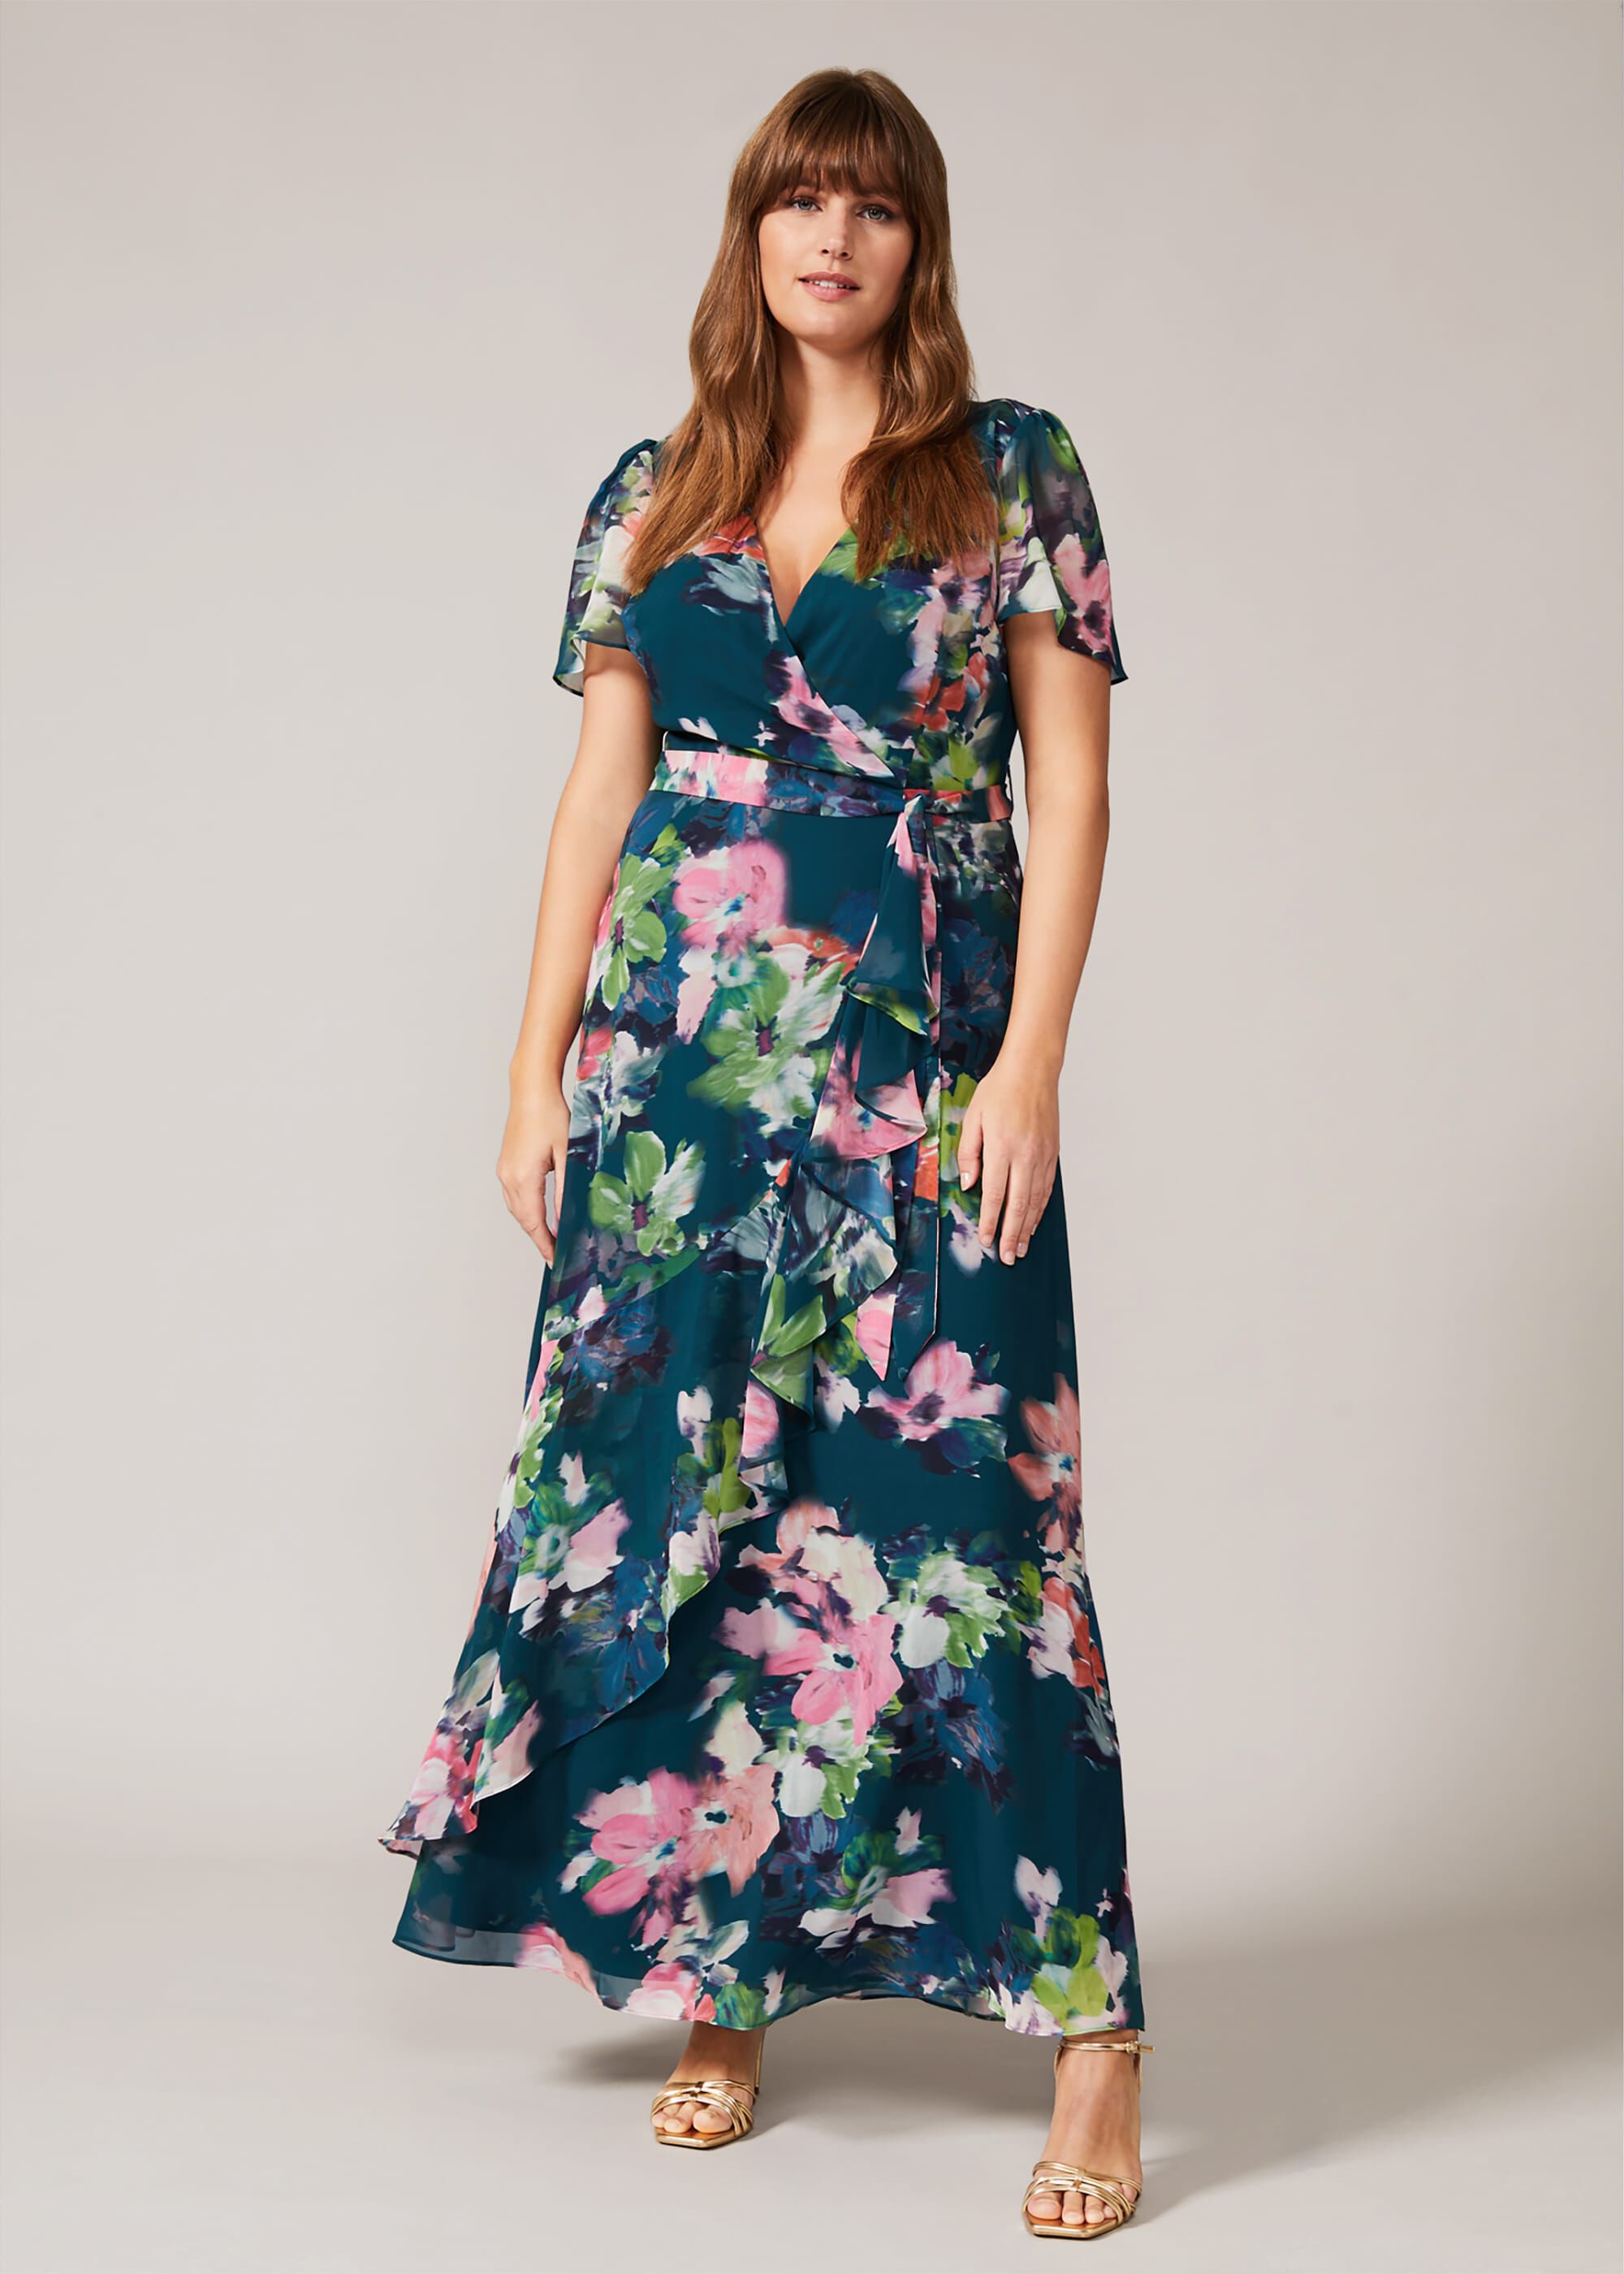 Cailyn Floral Maxi Dress | Phase Eight